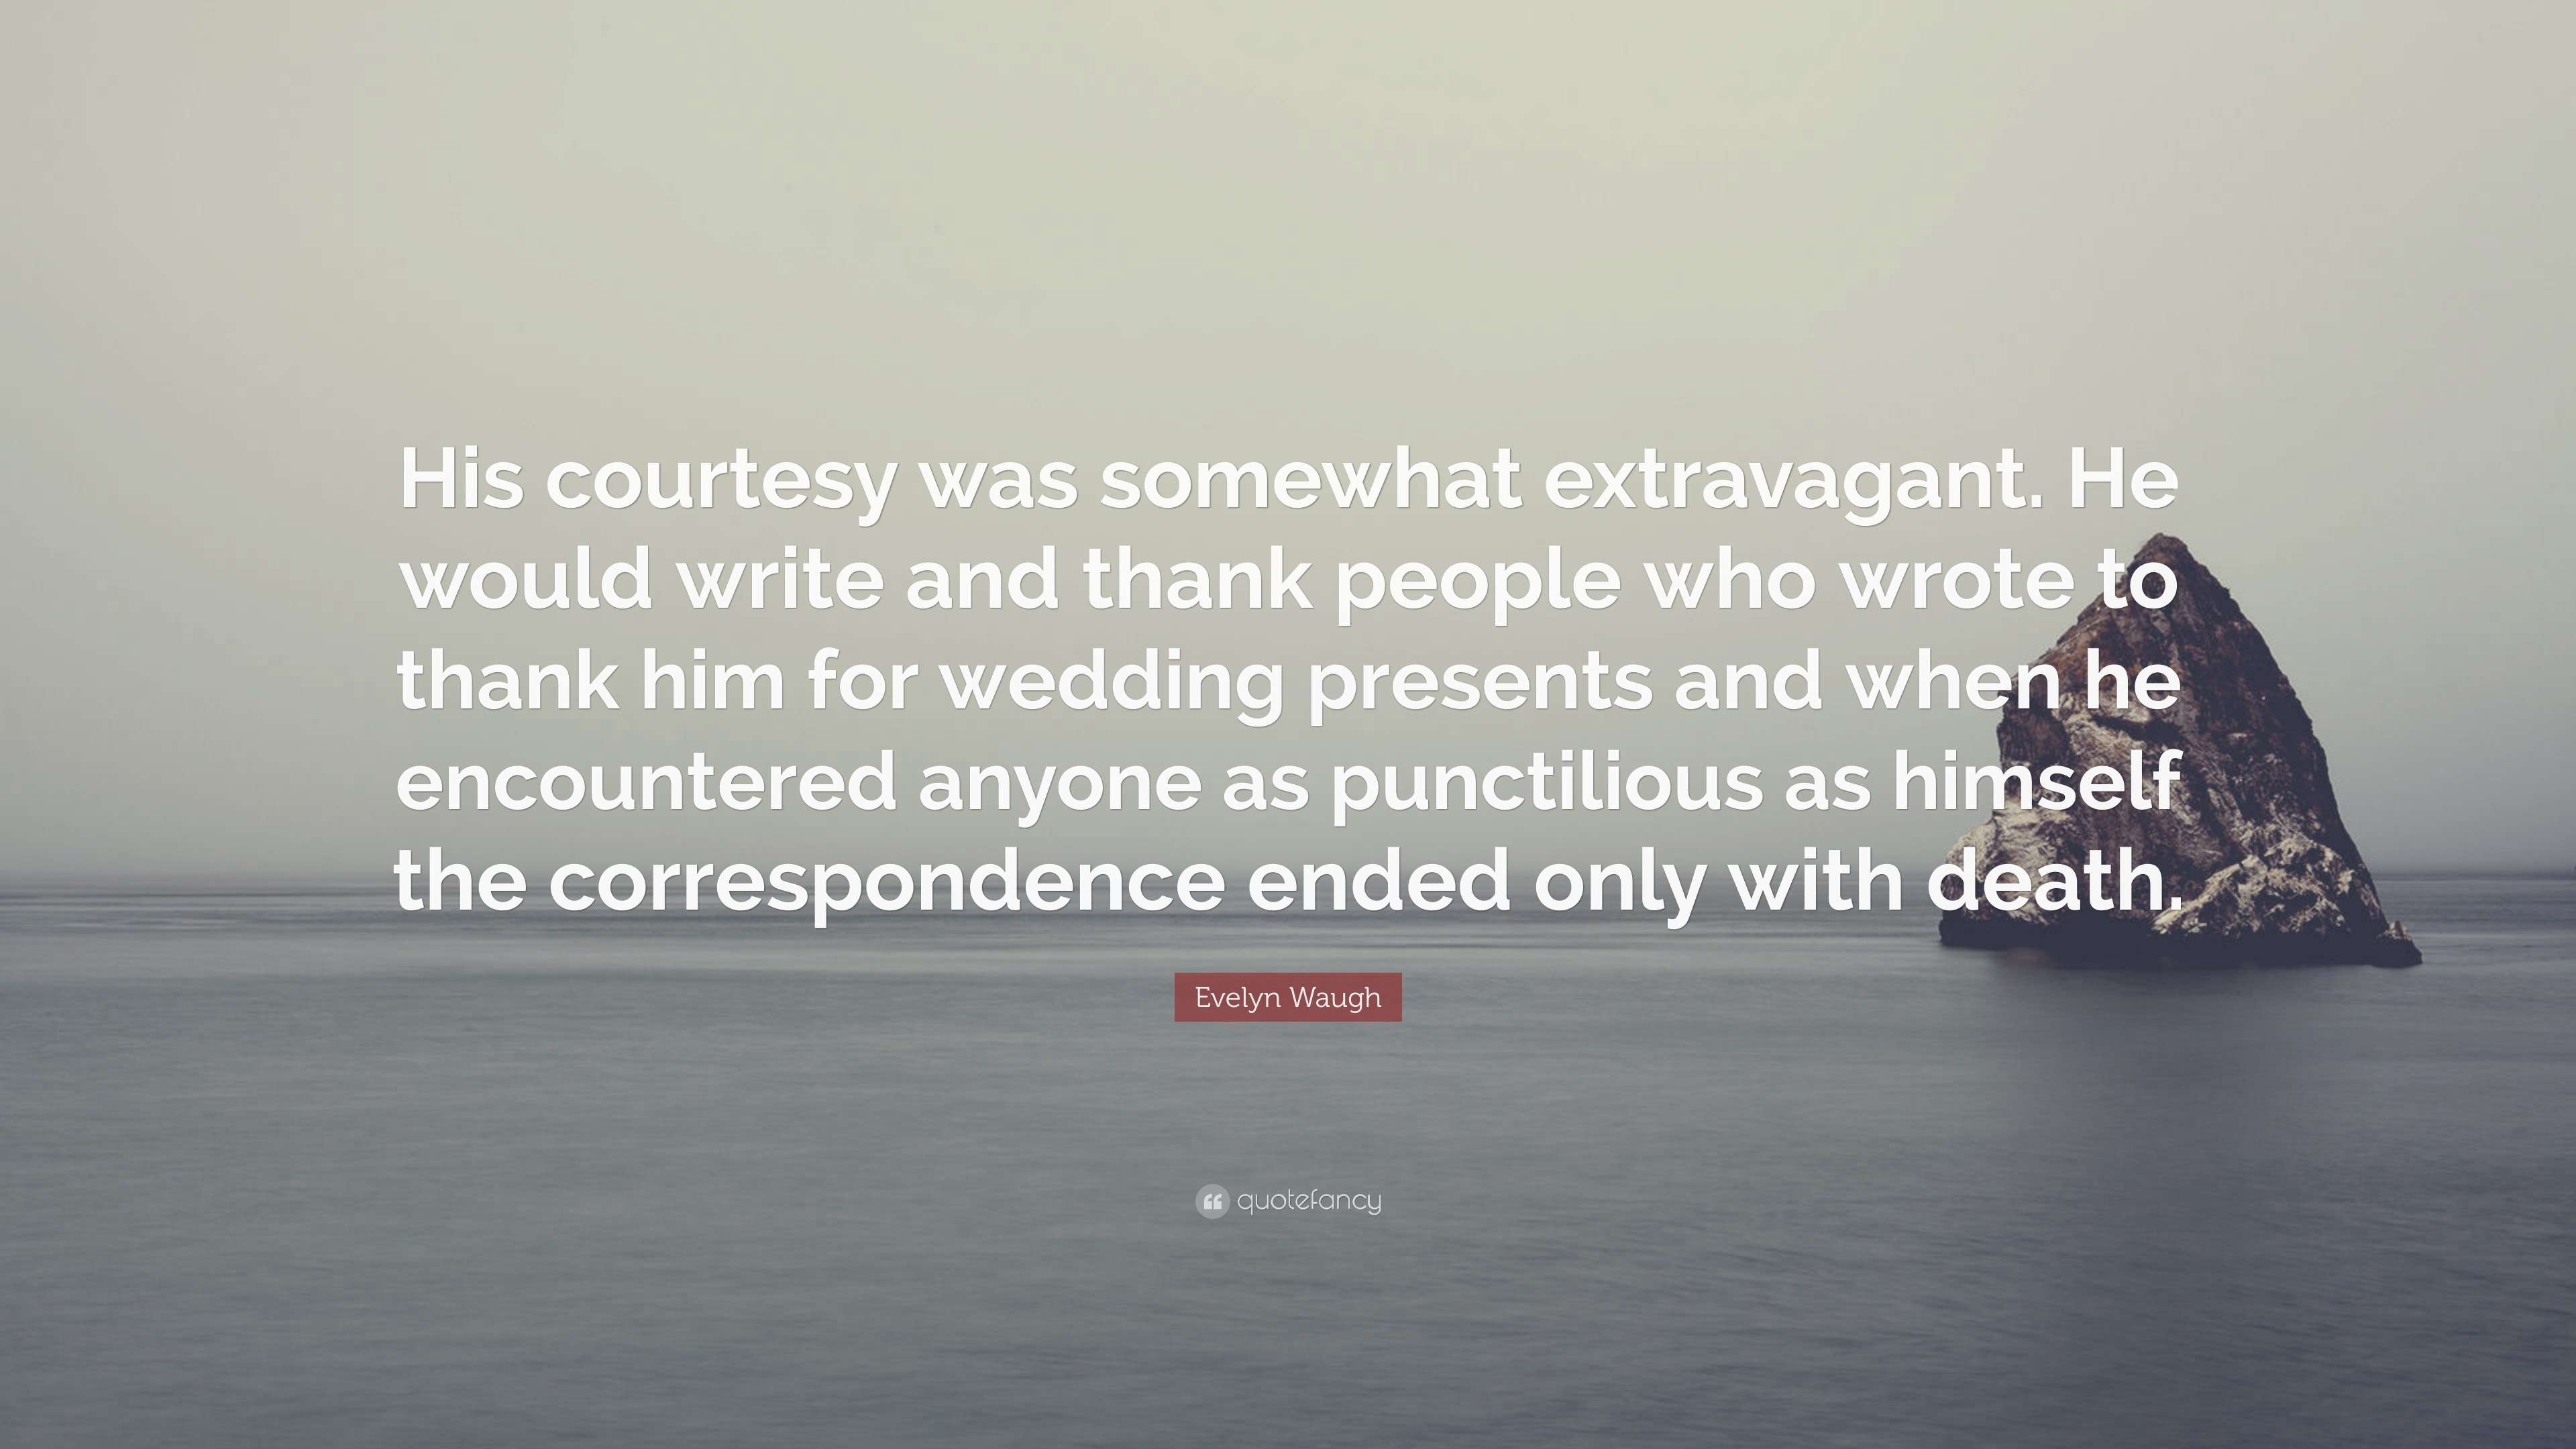 Evelyn Waugh Quote: “His courtesy was somewhat extravagant. He